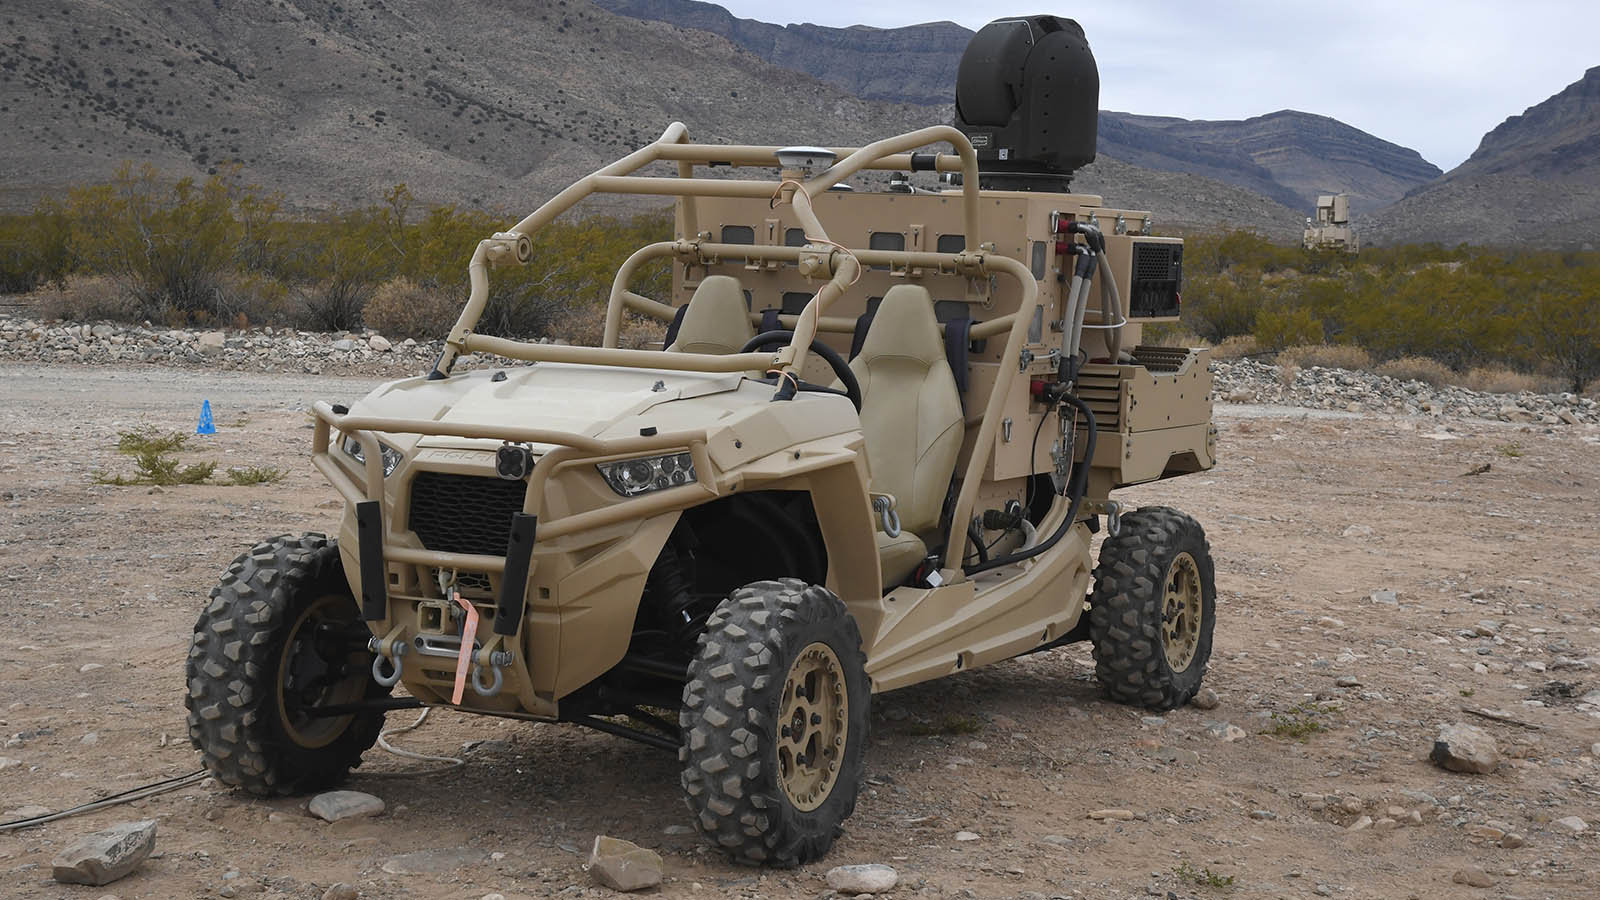 The High-Energy Laser Weapon System, mounted on a tactical military vehicle, demonstrates interoperability with the NASAMS air defense system at White Sands Missile Range.